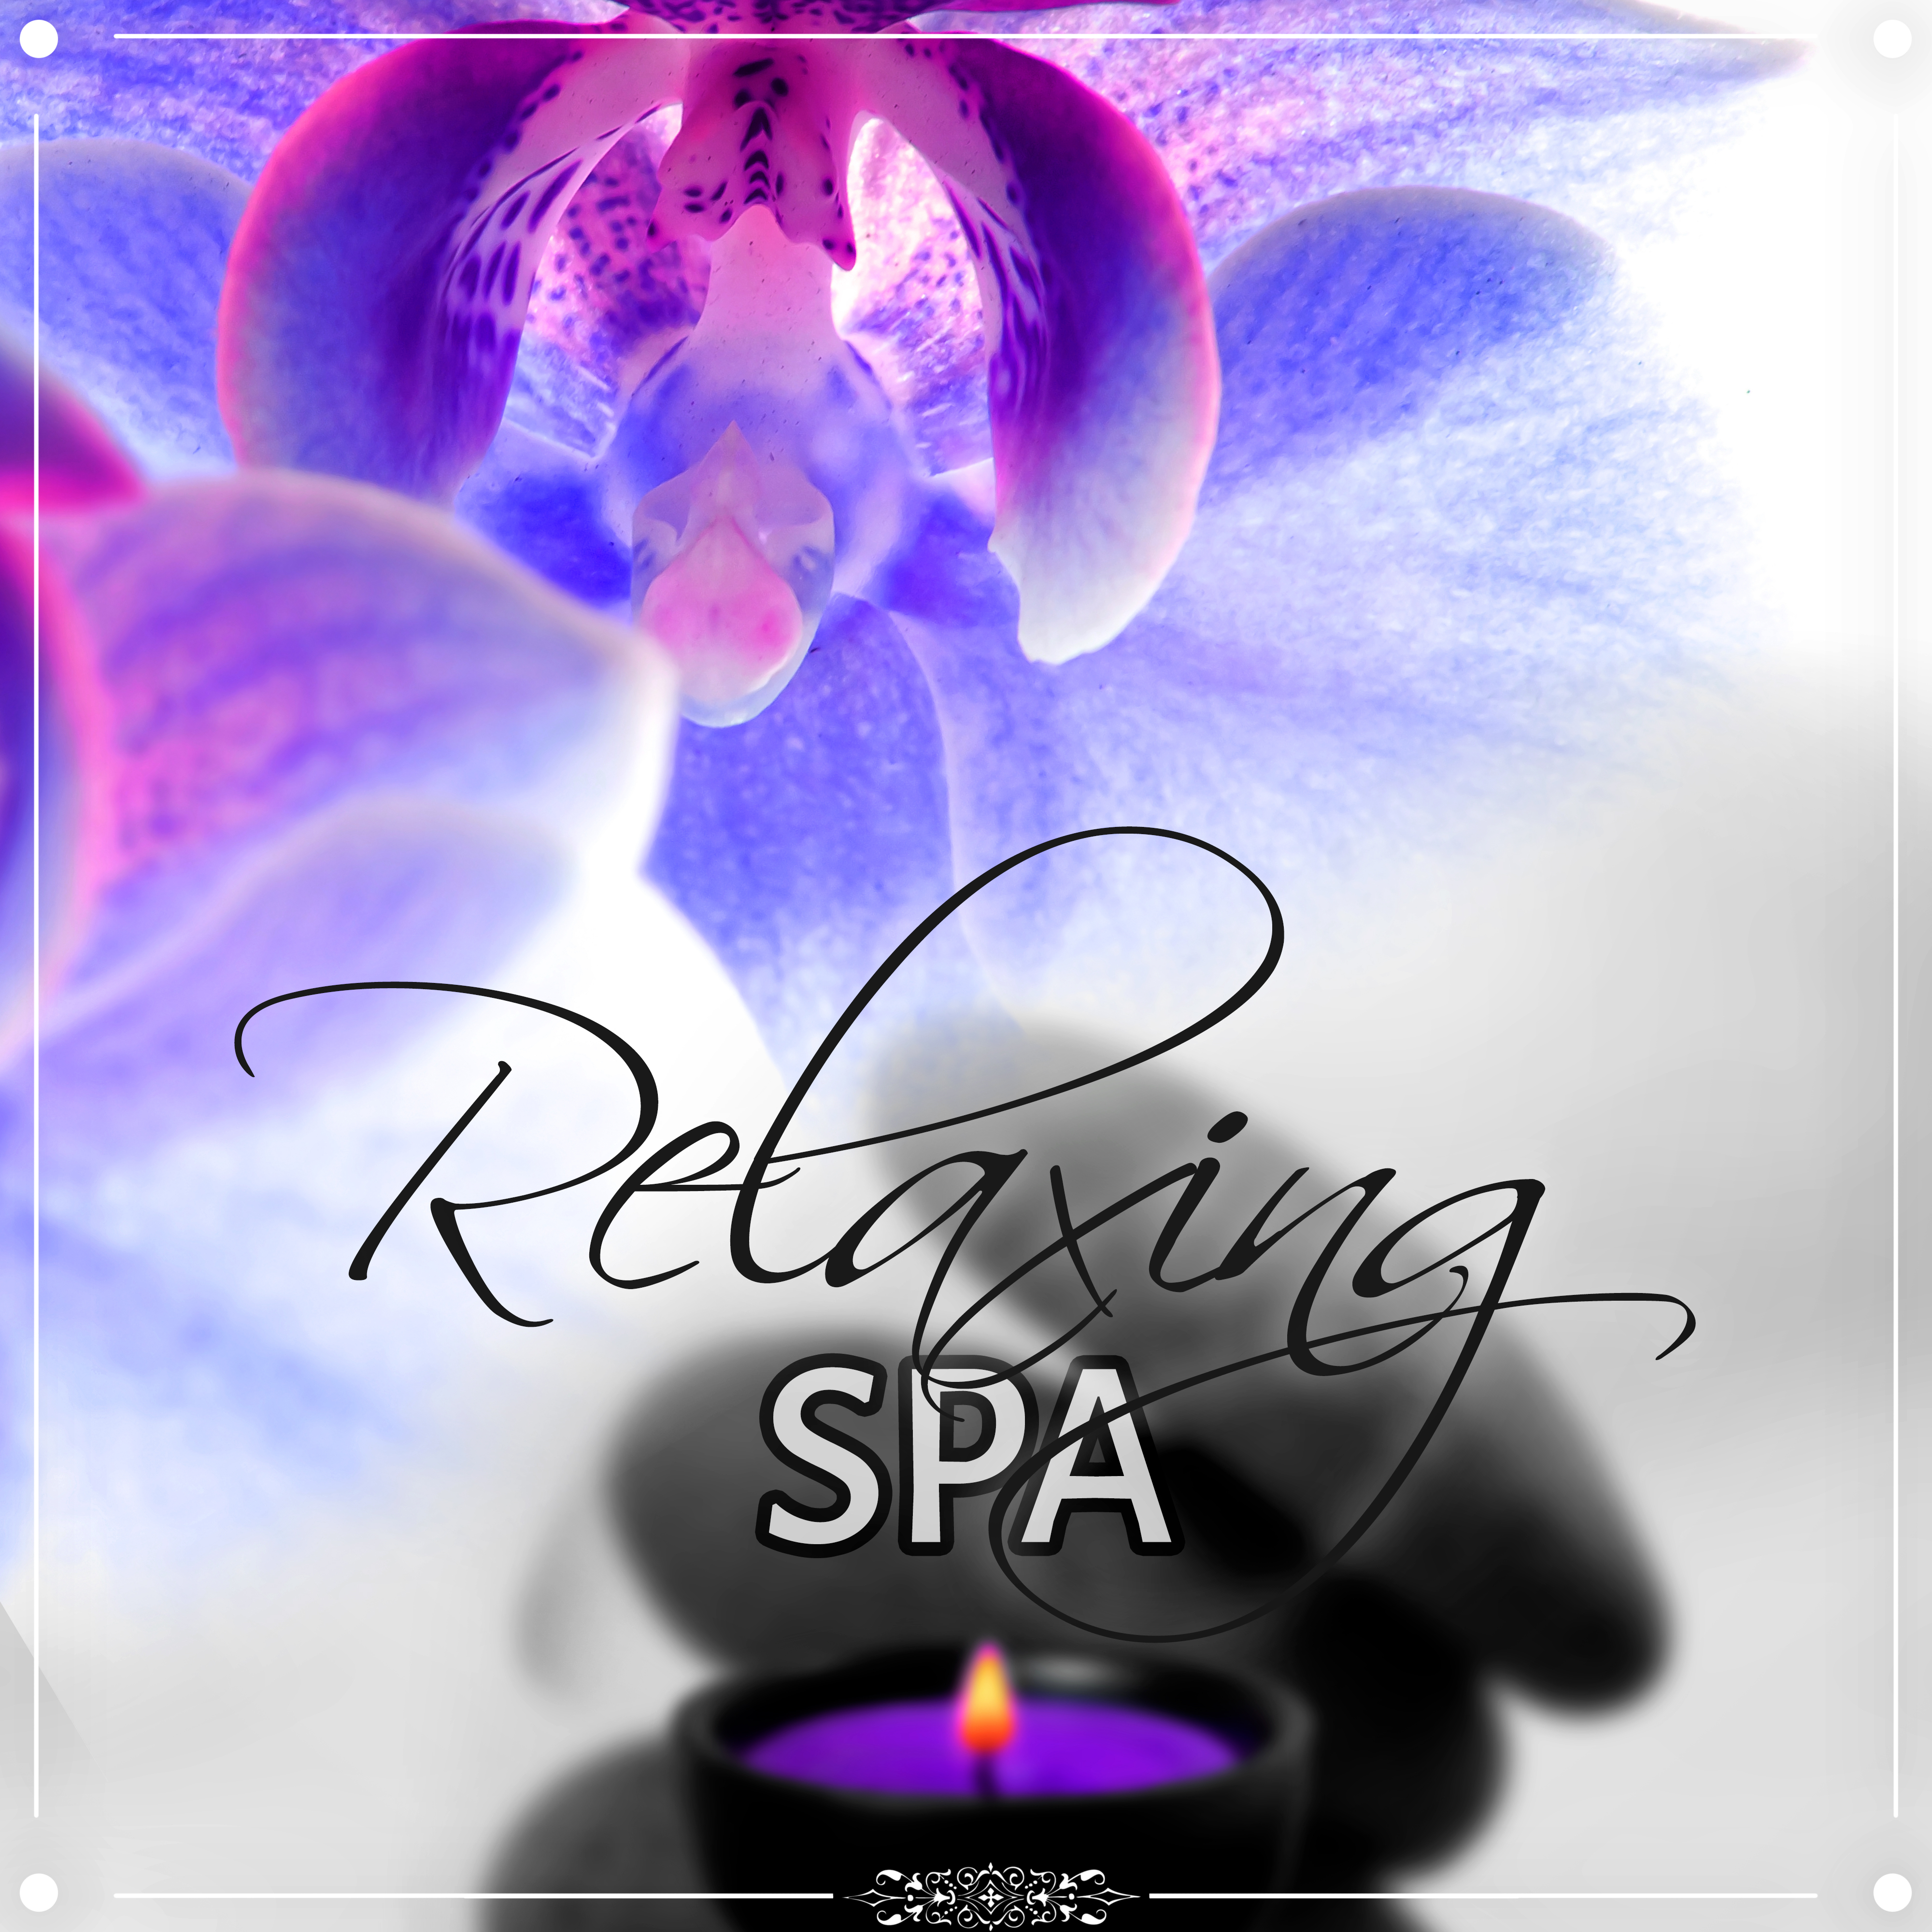 Relaxing Spa - New Age Meditation and Relaxation for Spa, Sounds of Nature for Hotel Spa, Massage Music for Aromatherapy, Background Music for Inner Peace